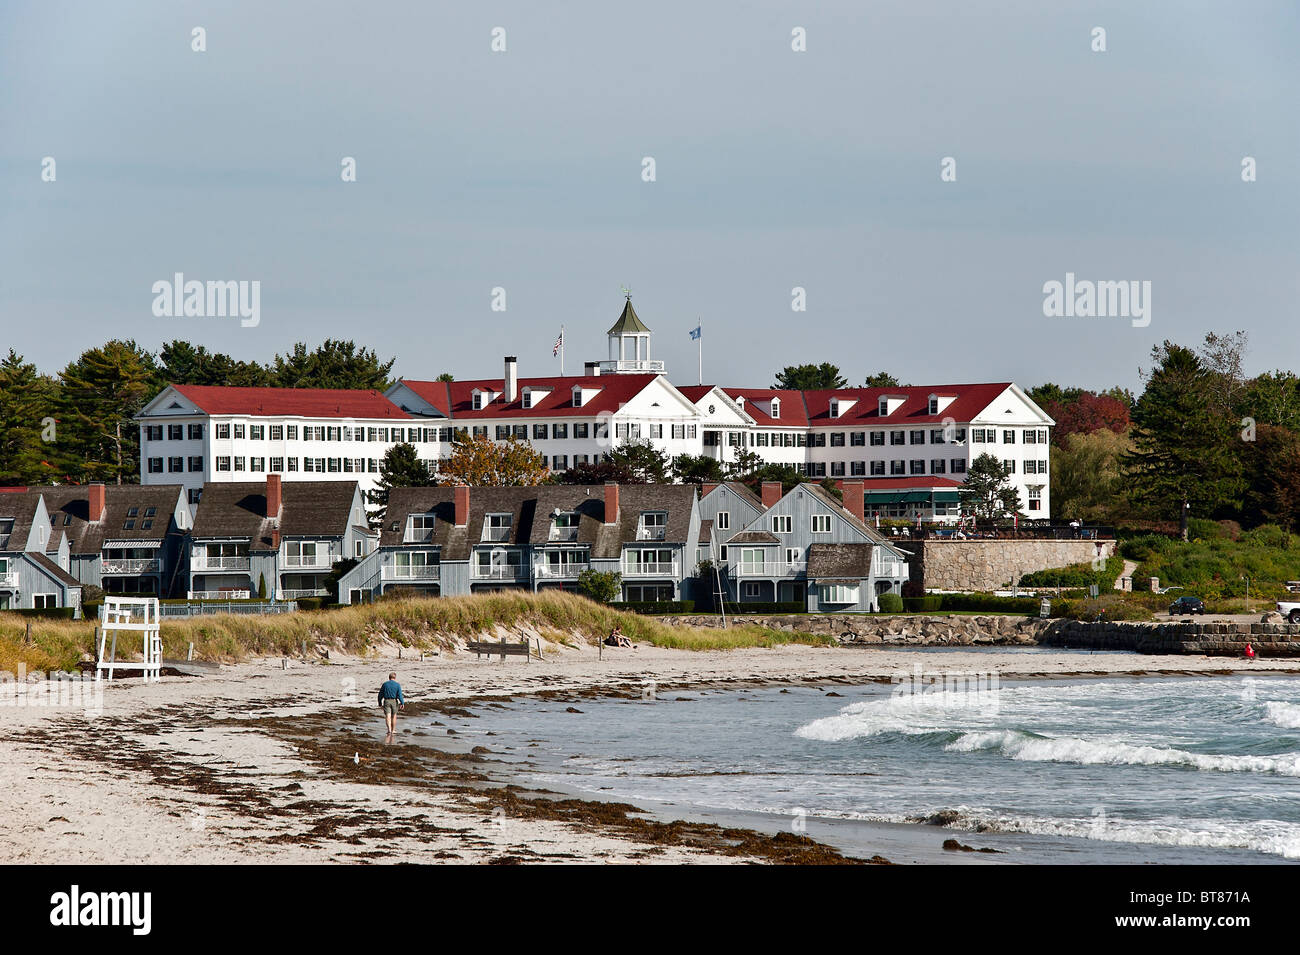 The Colony Hotel, Kennebunkport, Maine Stock Photo